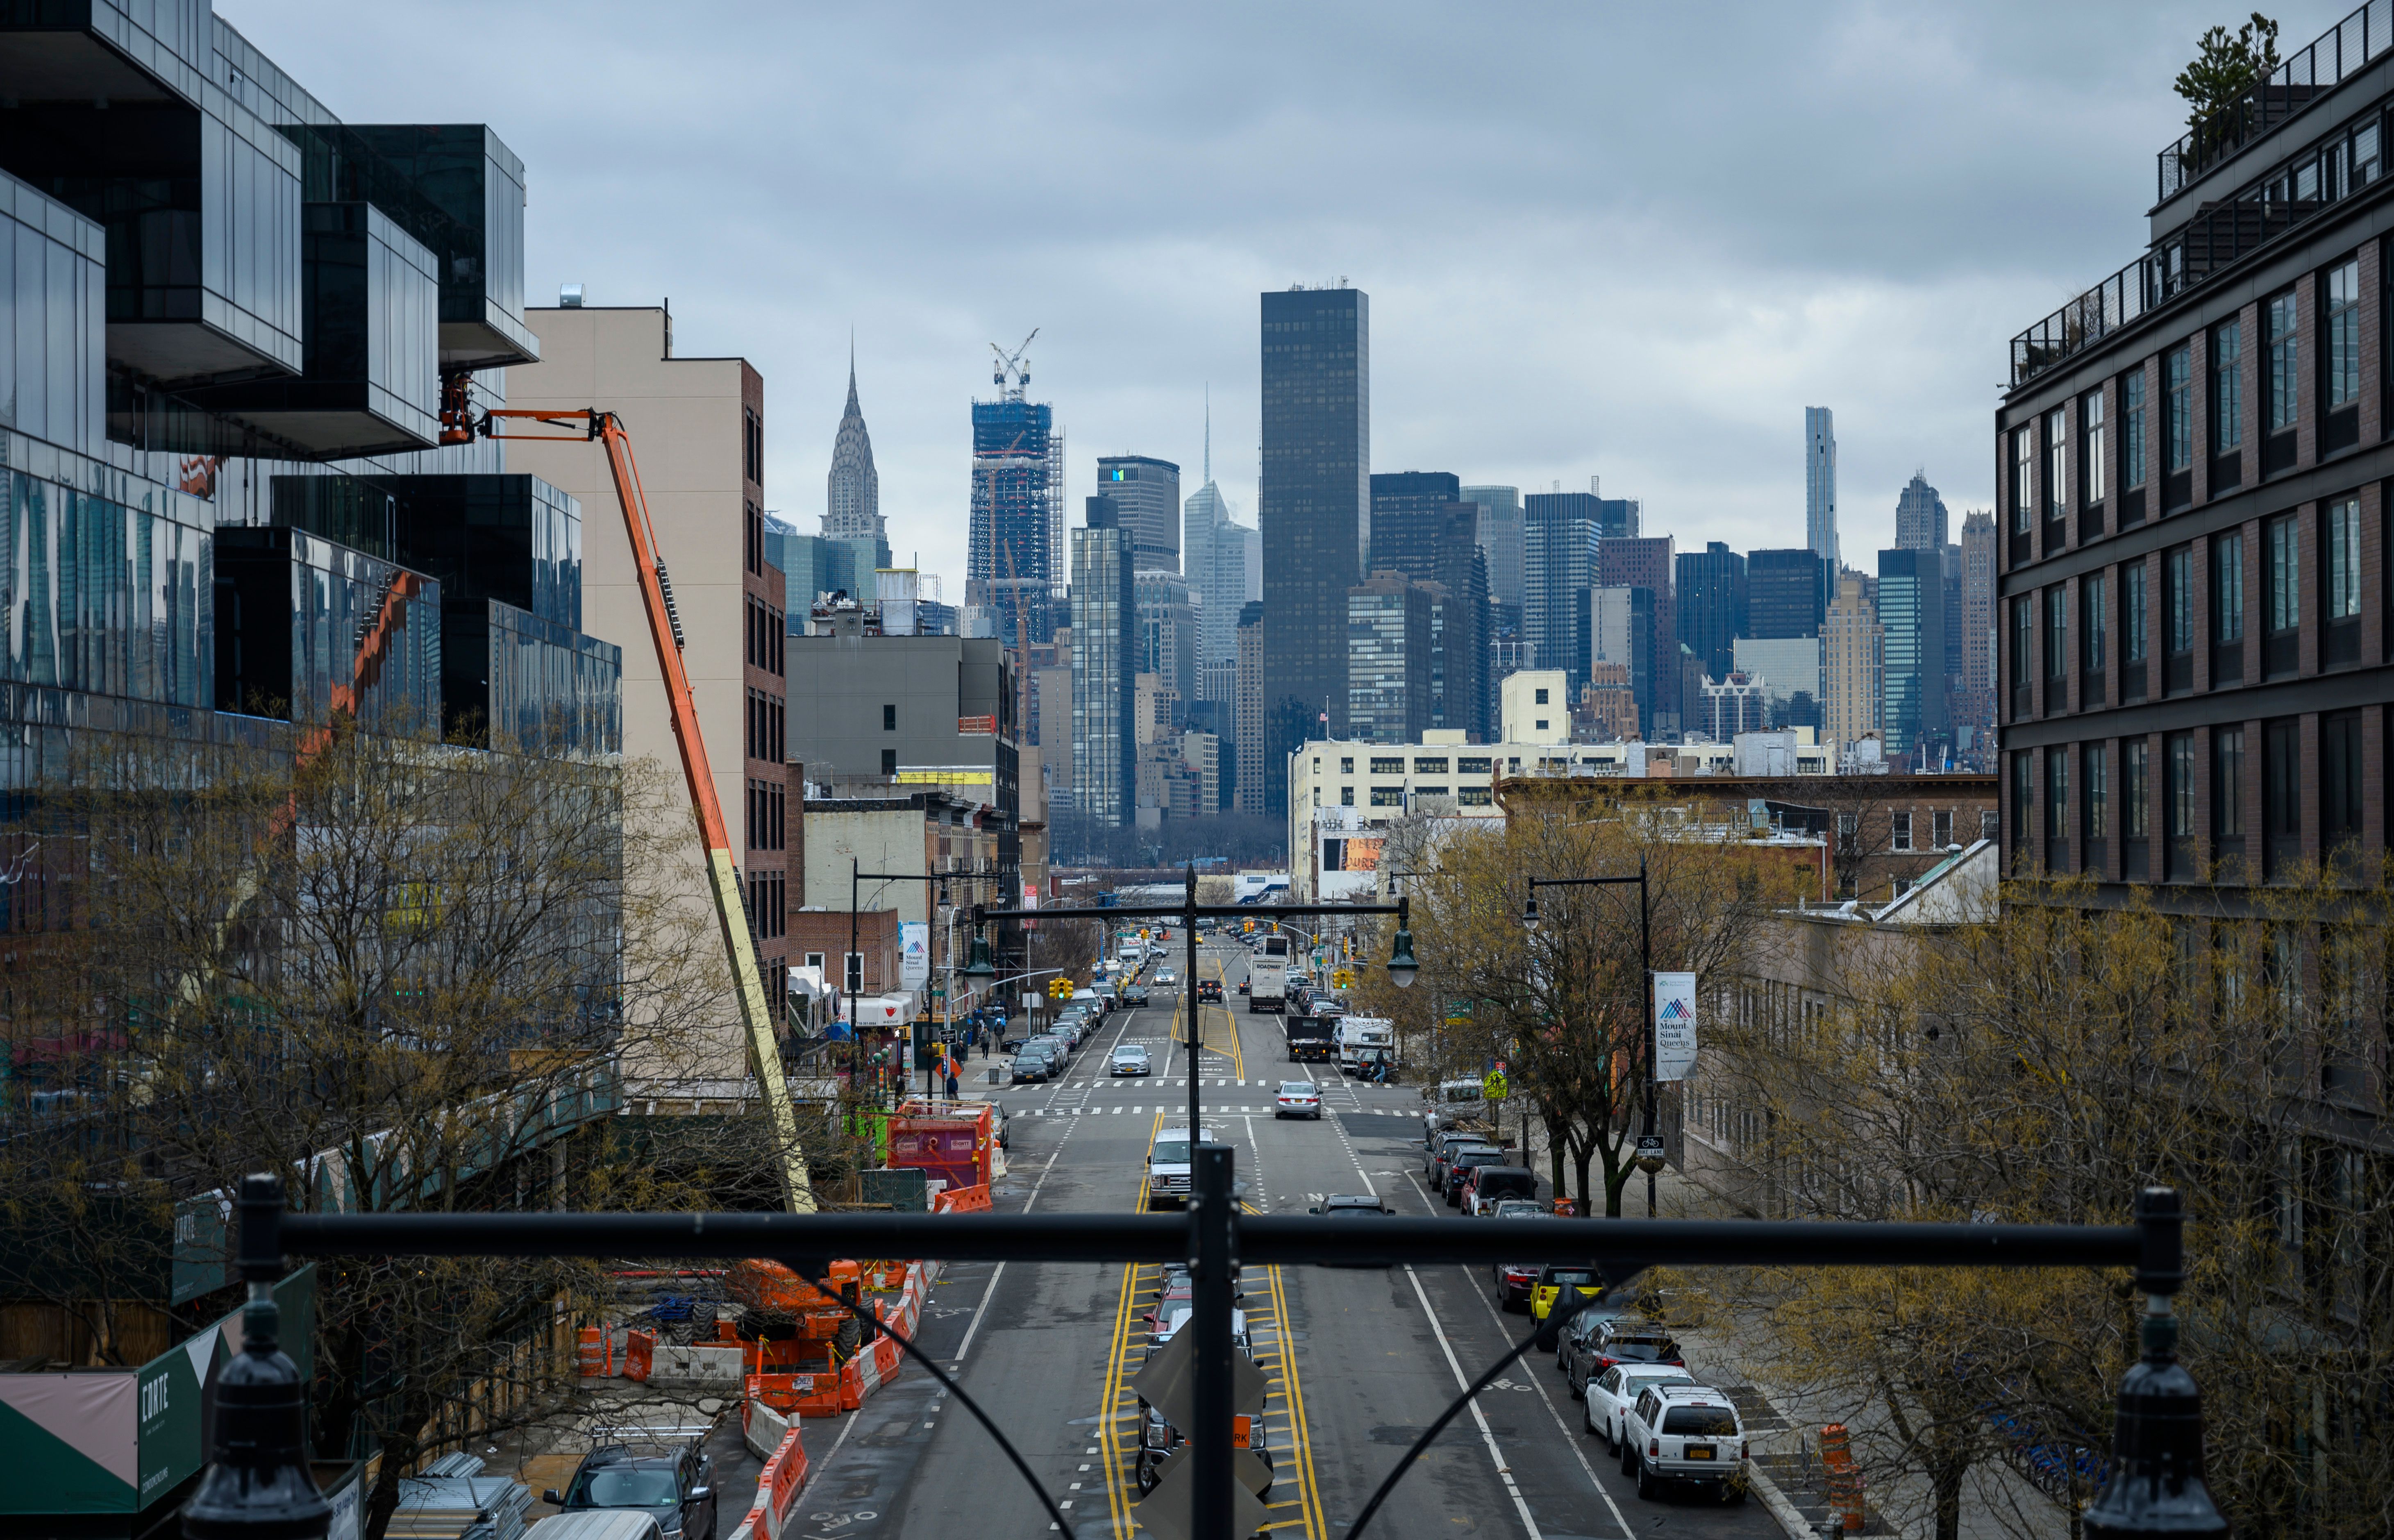 View of a street in Long Island City on Feb. 18, 2019 in the Queens borough of New York City where Amazon said they are cancelling plans to build a second corporate headquarter. (Johannes Eisele/AFP via Getty Images)